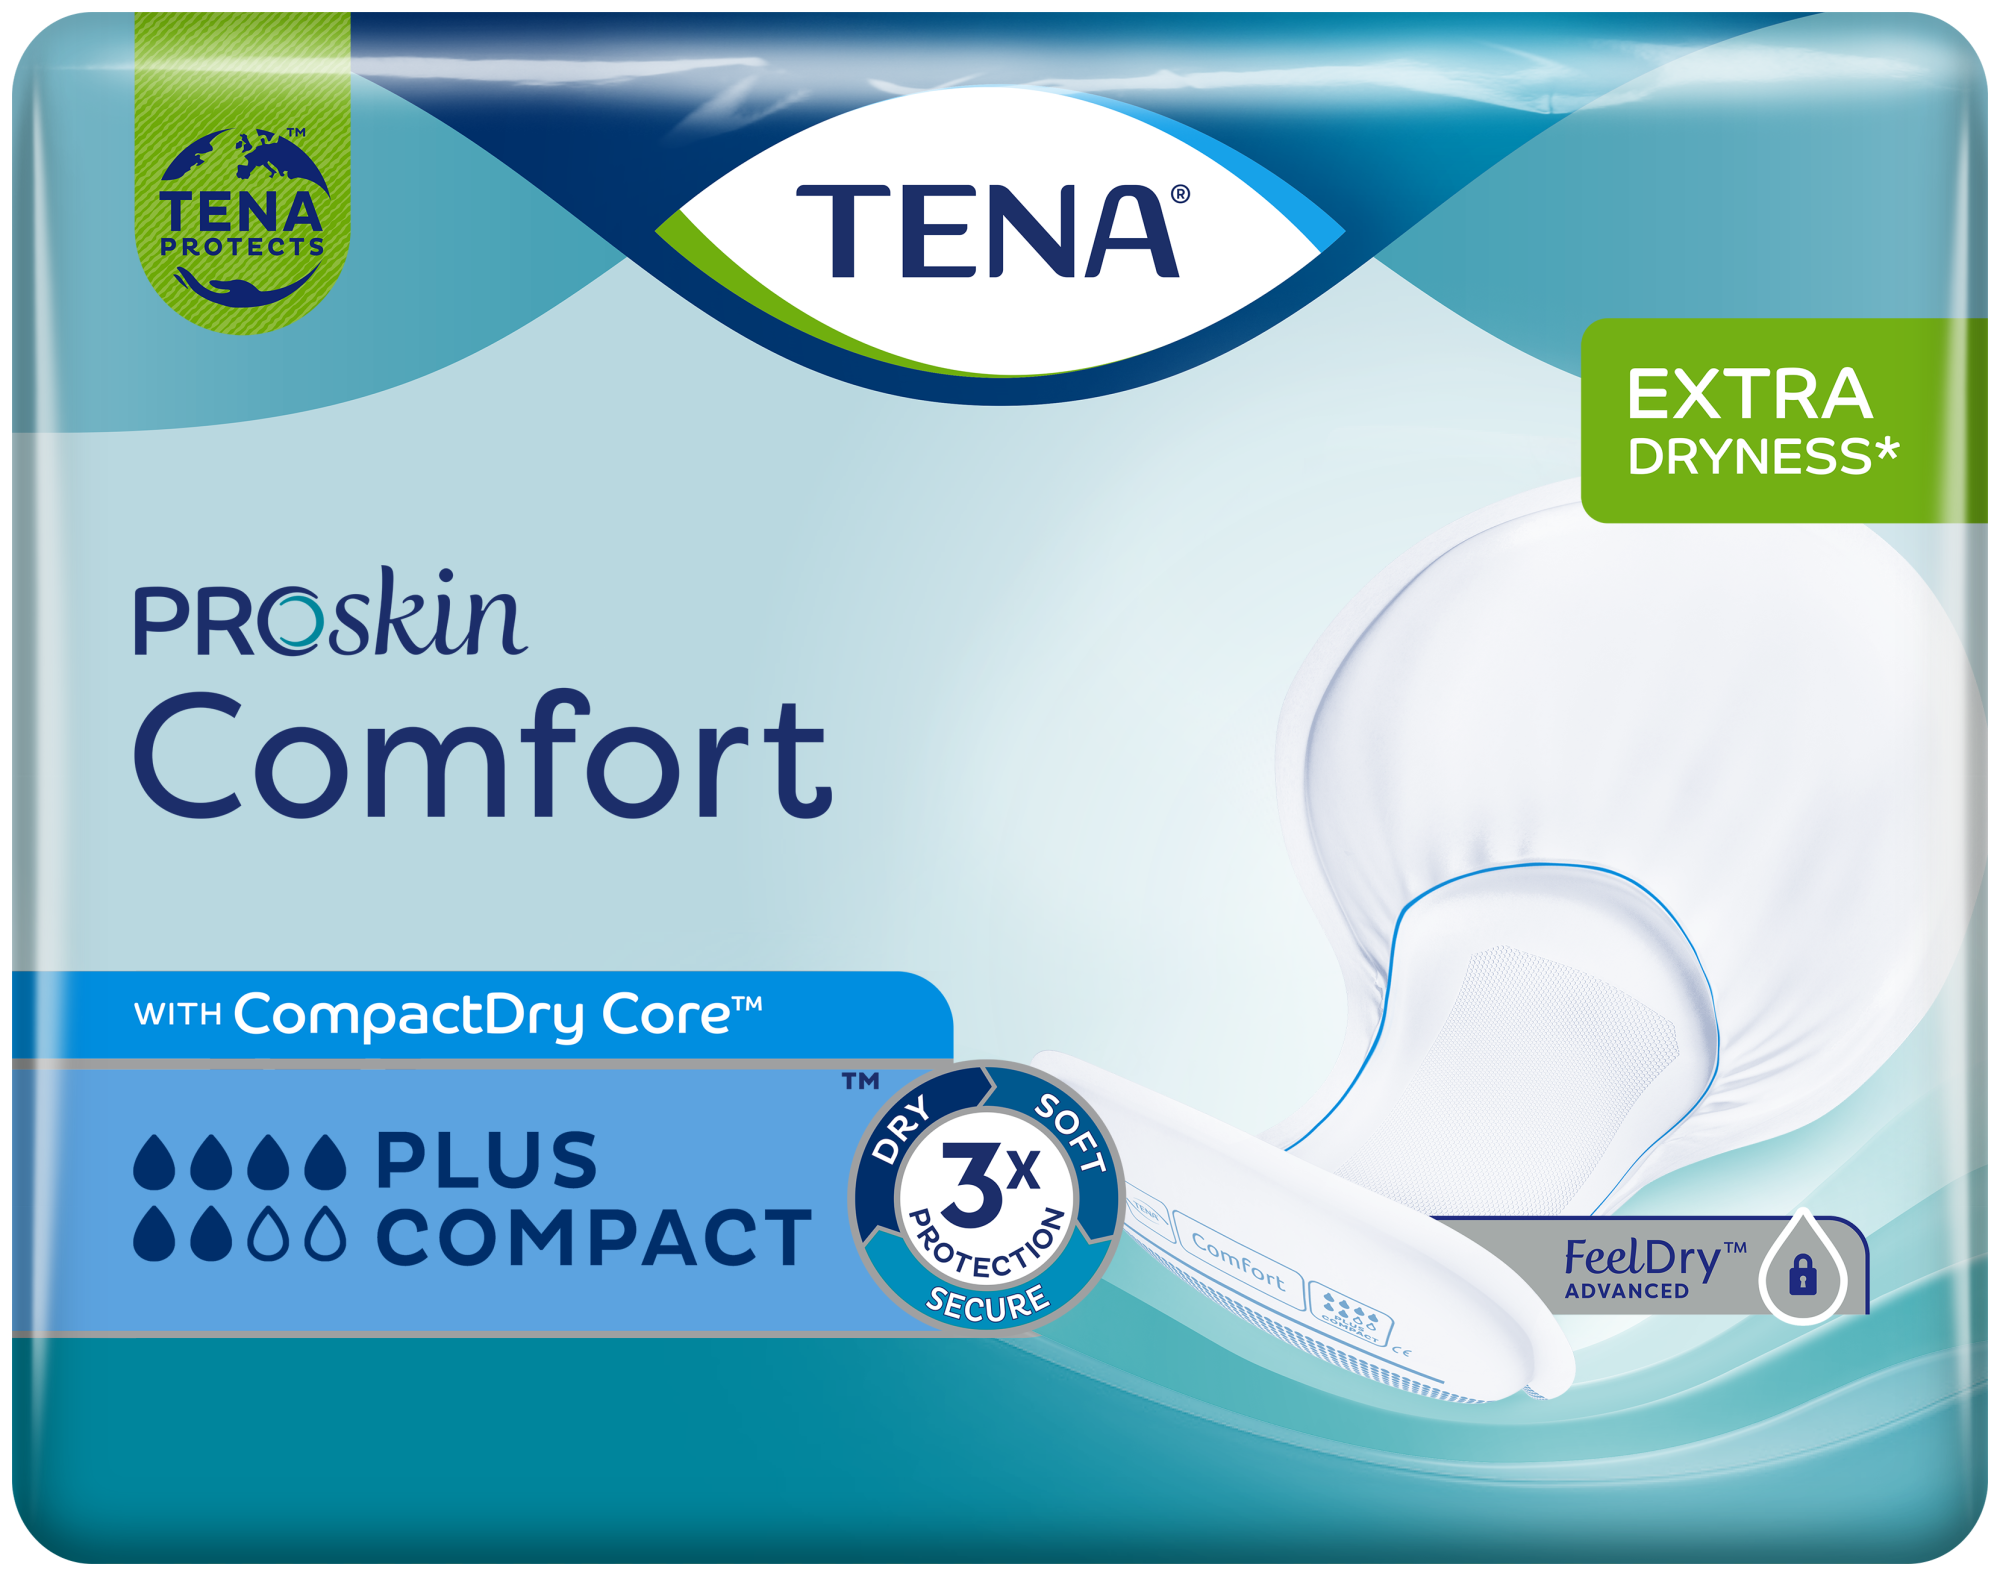 Large shaped incontinence pads